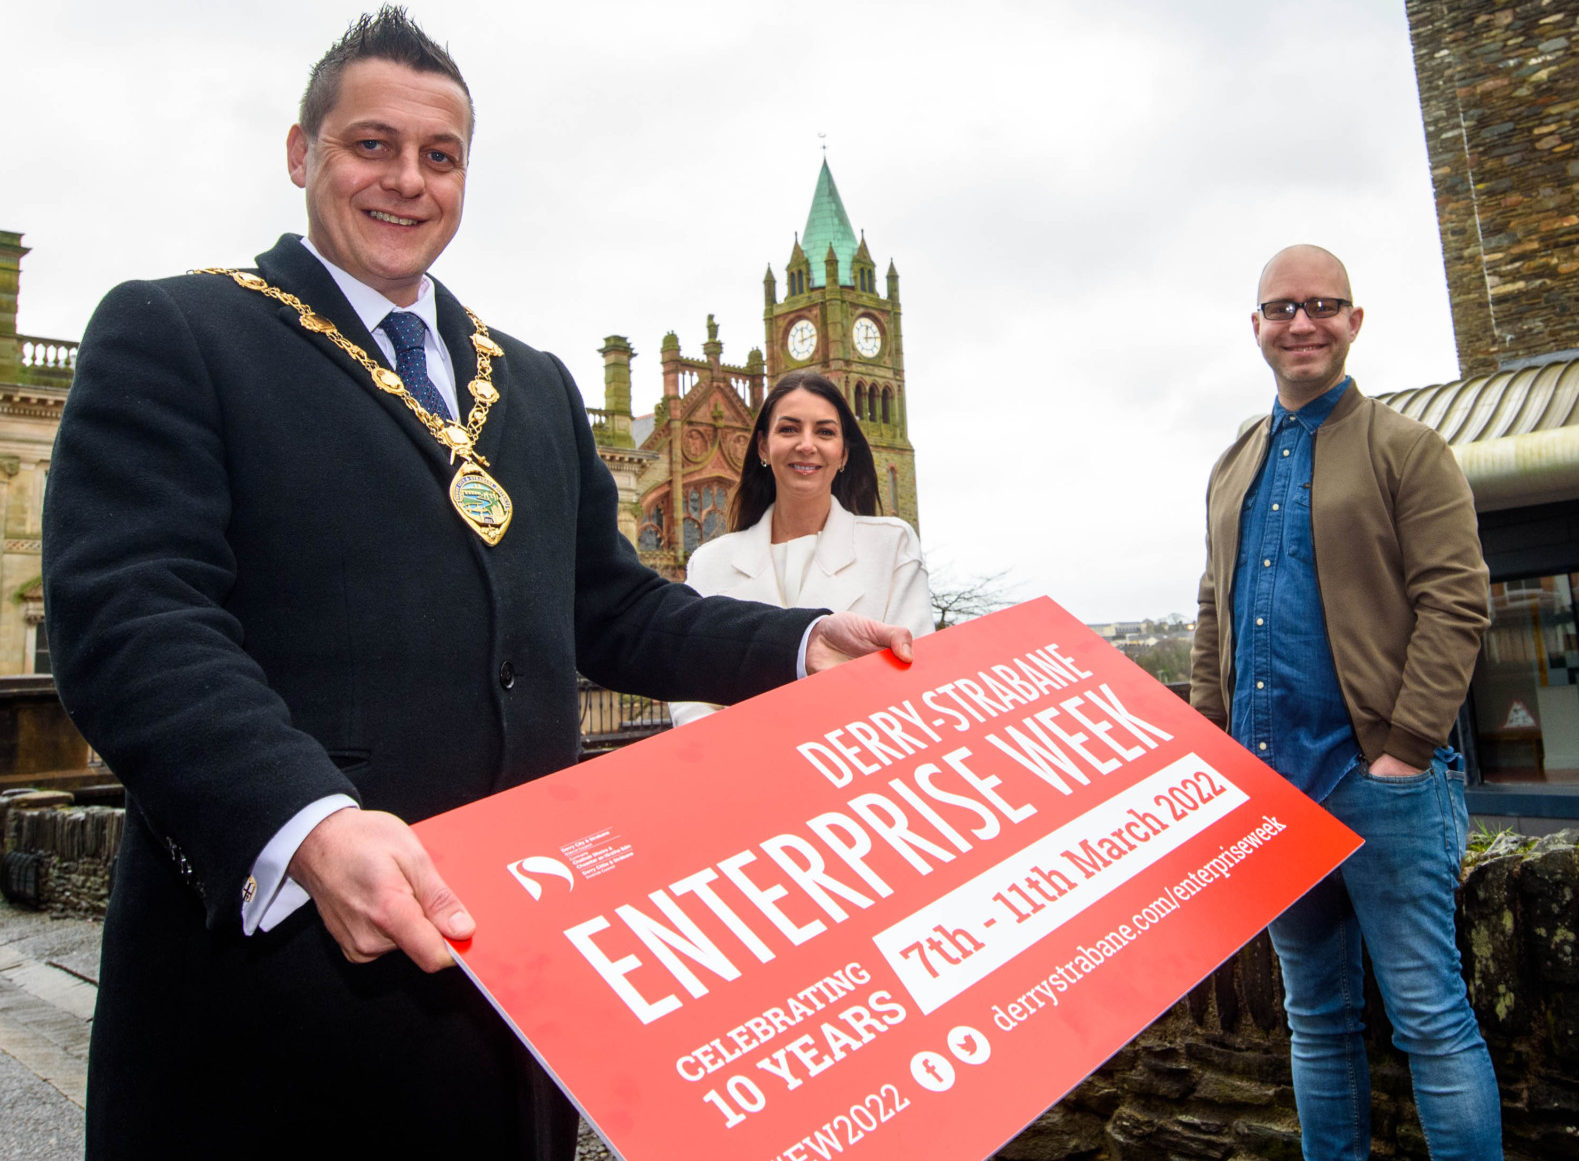 Enterprise Week to help build resilience and drive innovation